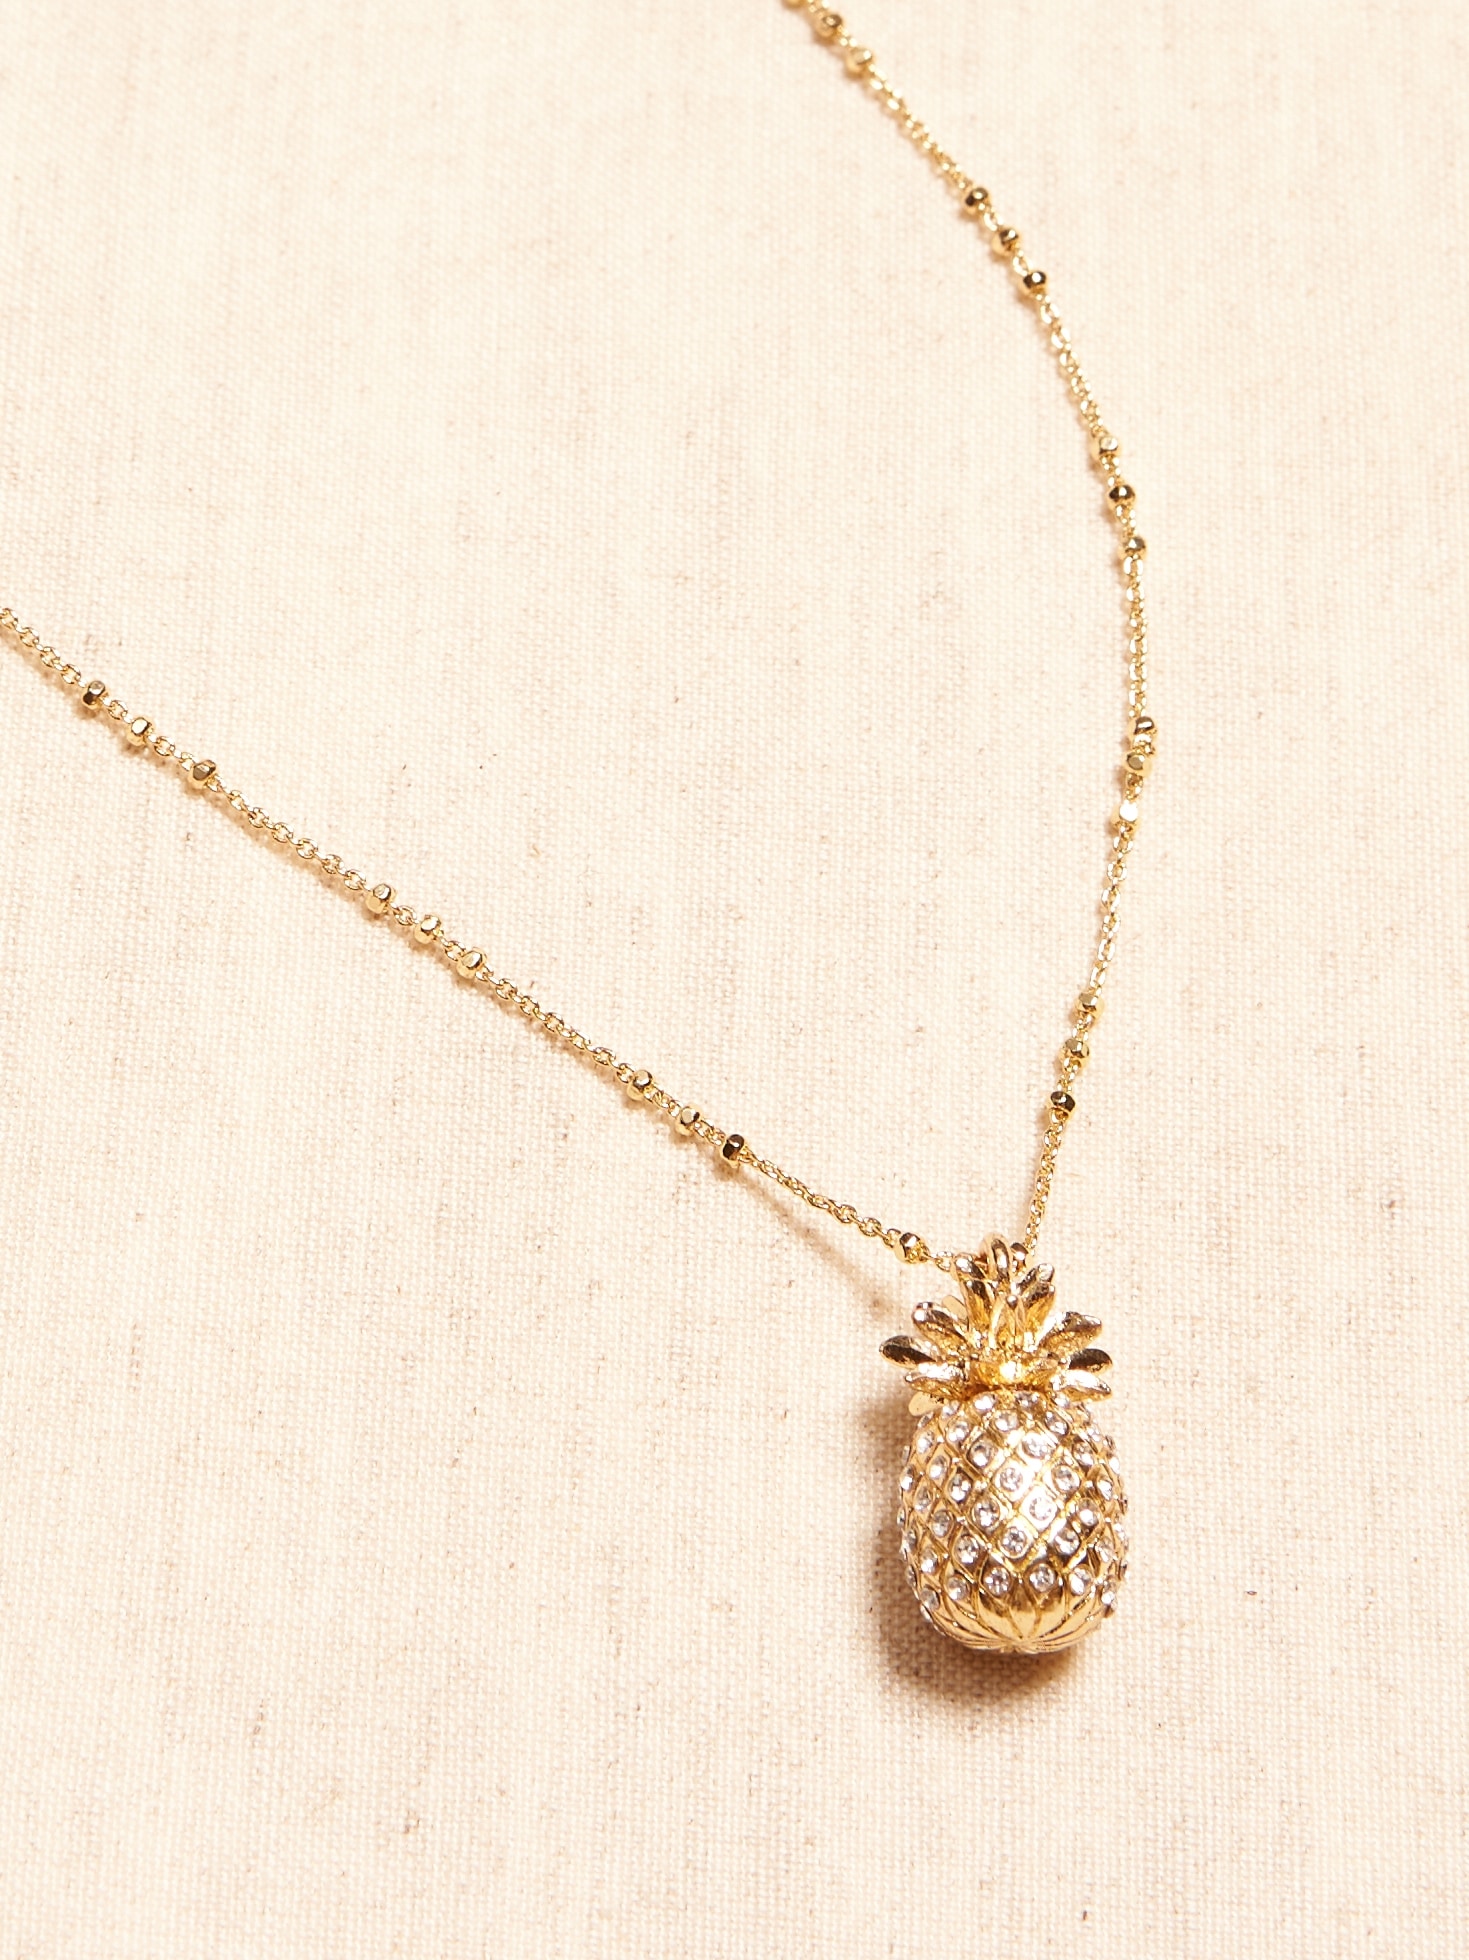 Pineapple Delicate Necklace